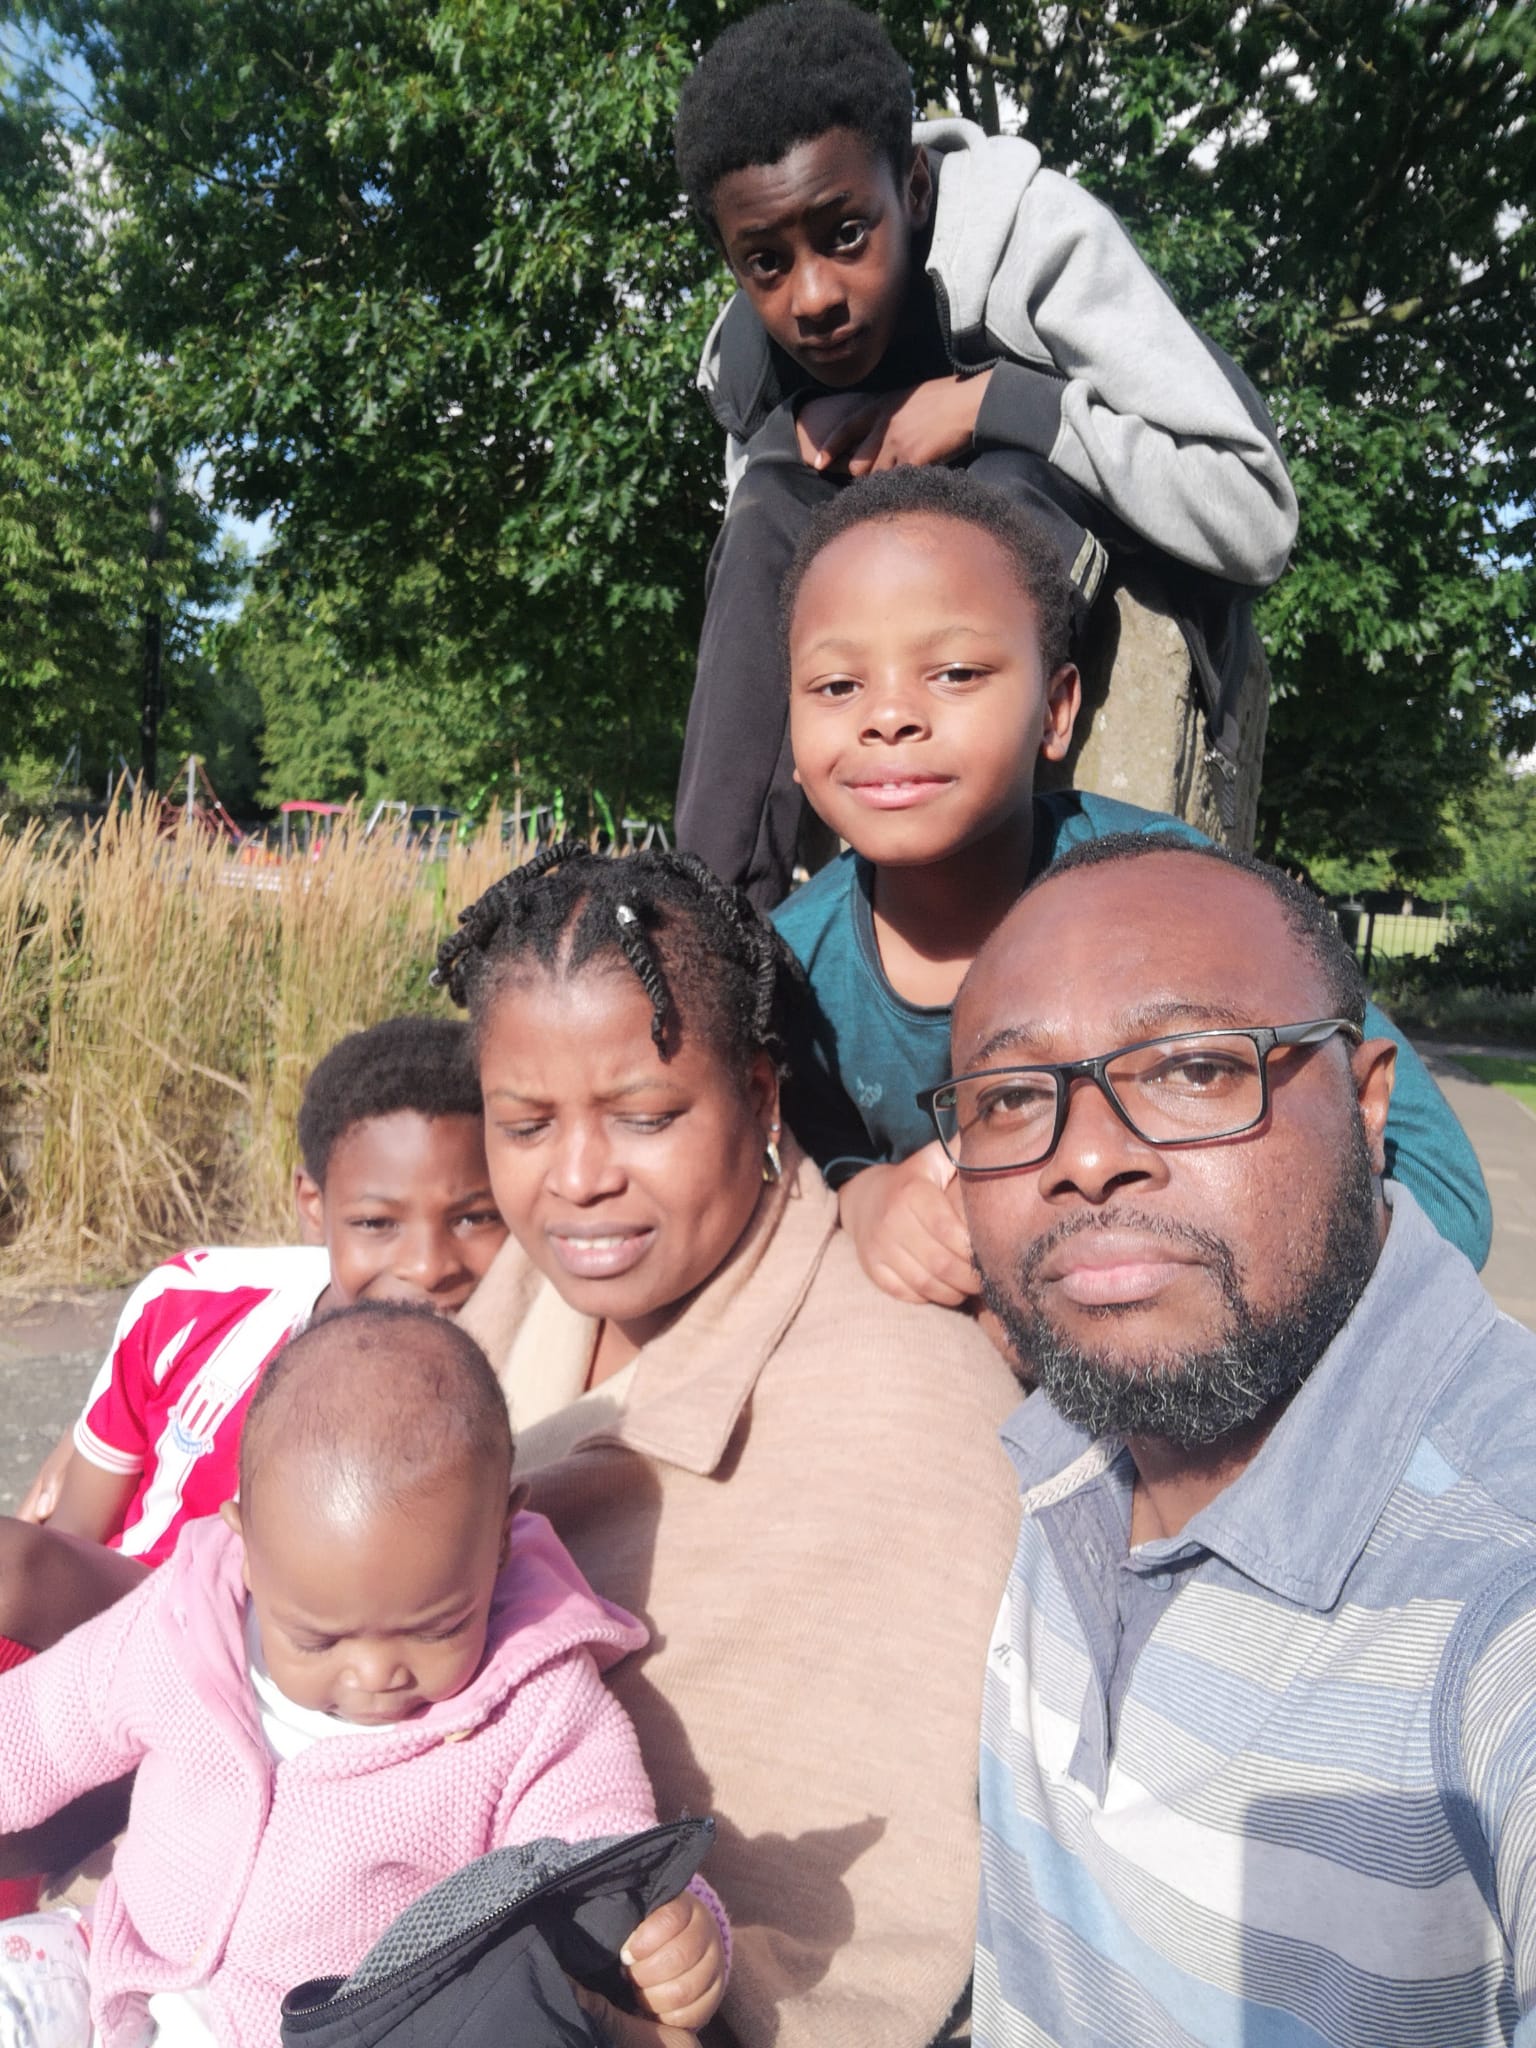 Mrs Edwards-Okafor, her husband Edward with their children fear for their future